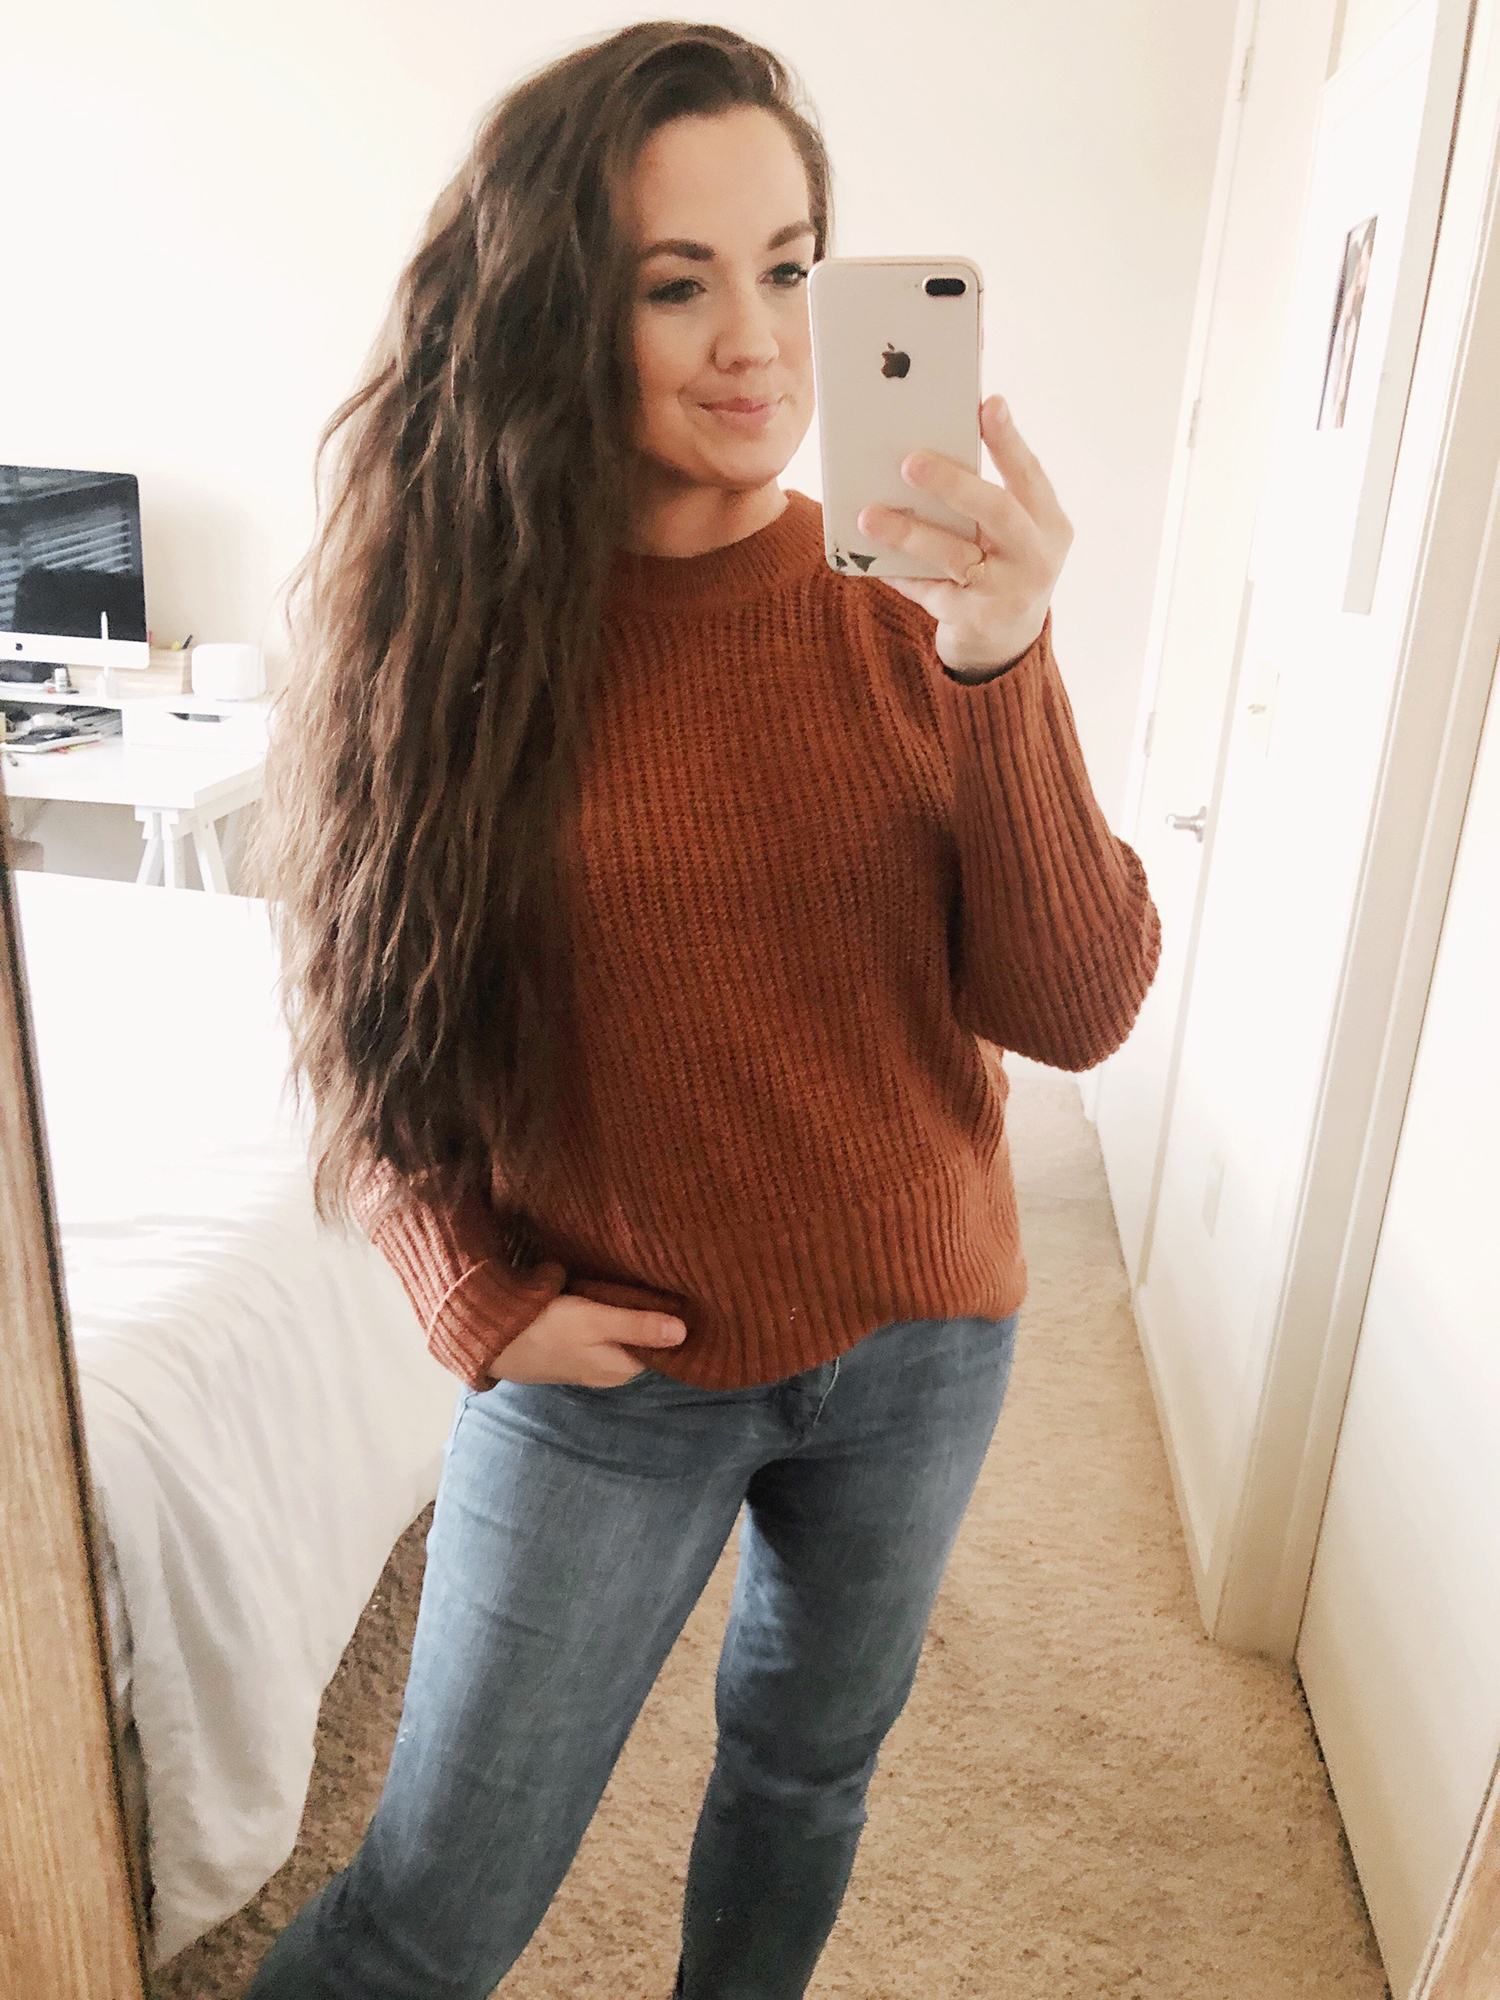 Favorite fall and winter style finds at Target right now. They absolutely killed it in the wardrobe department and I am loving it! Catch my favorites over on Haus of Layne #FallStyle #FallOutfitIdeas #WinterStyle #WinterOutfitIdeas #FavoriteStyleFinds #TargetStyle